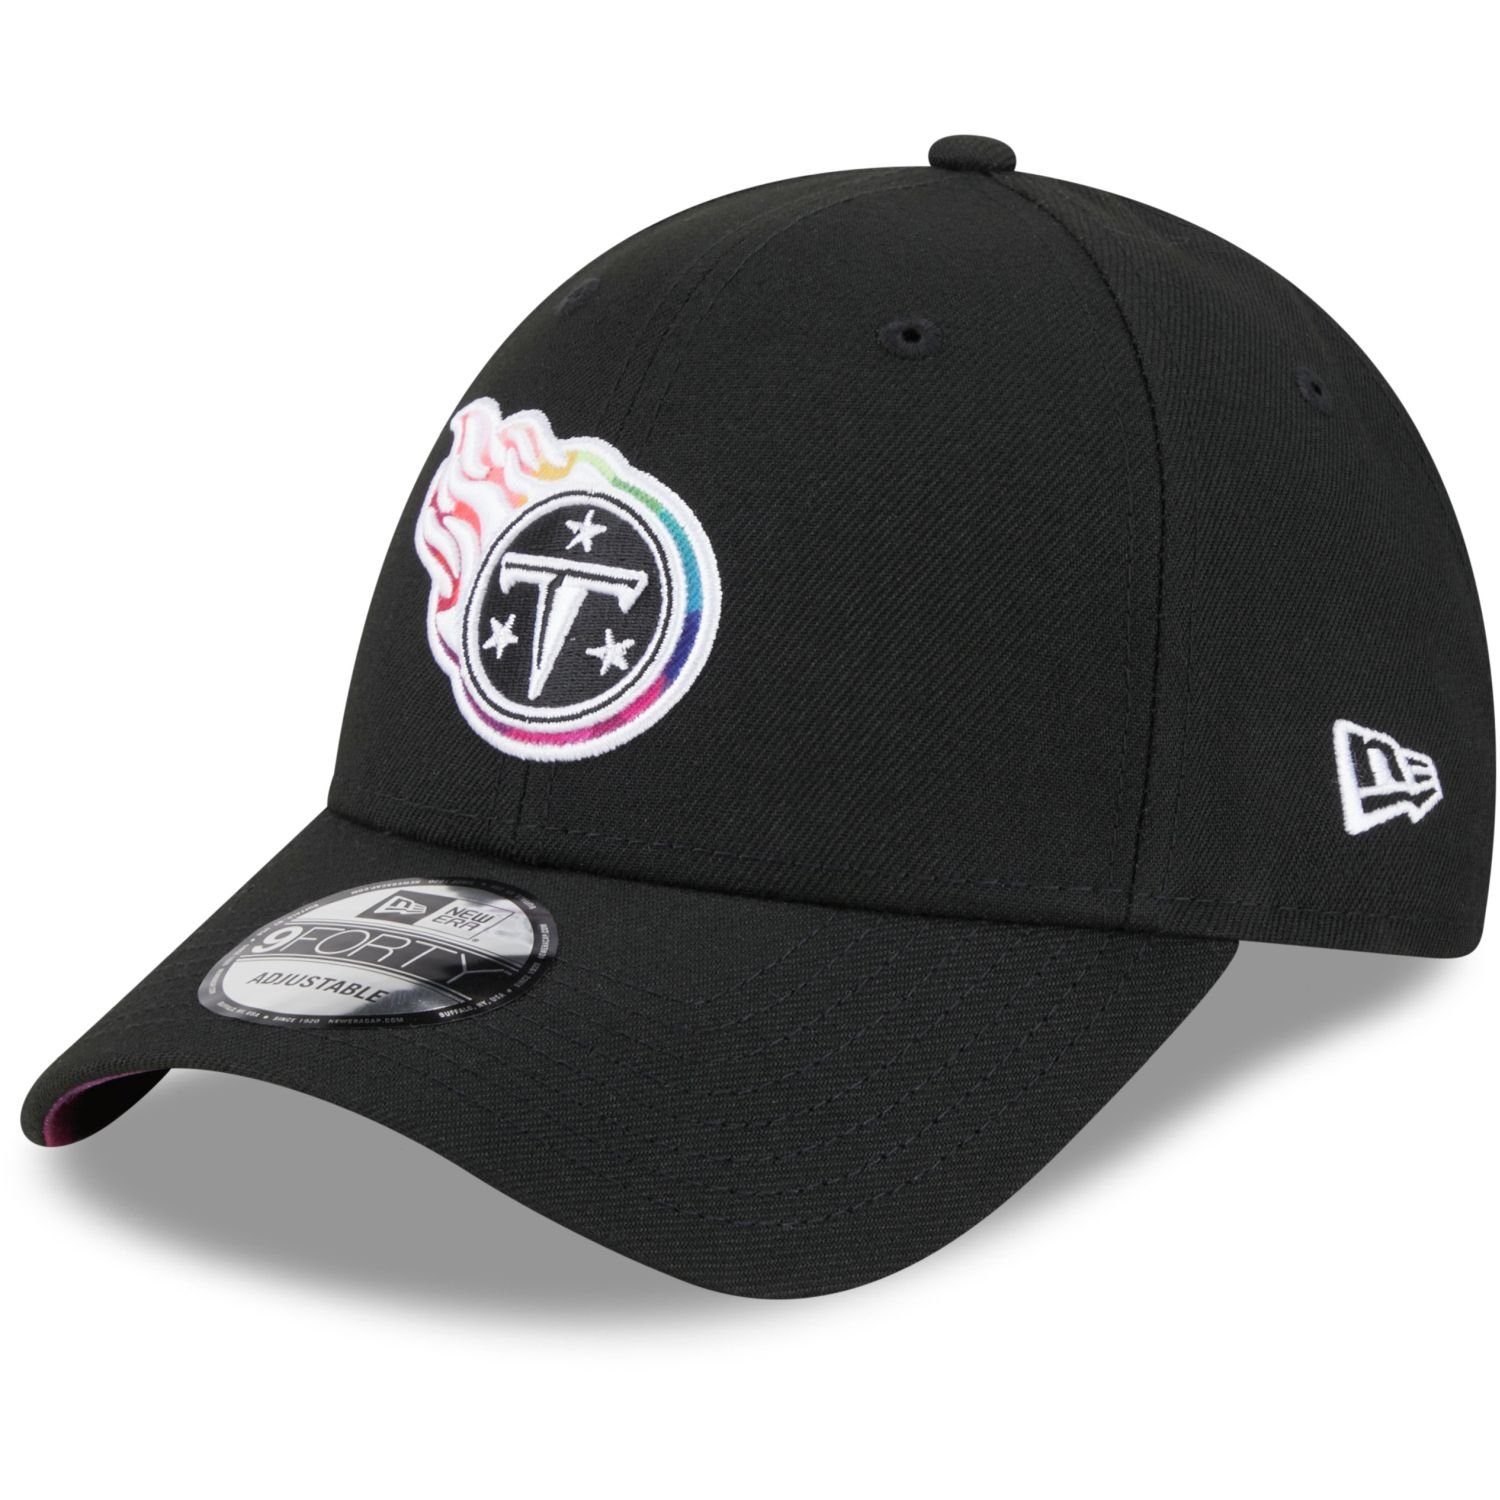 New Era Snapback Cap CATCH CRUCIAL Tennessee Teams 9FORTY NFL Titans